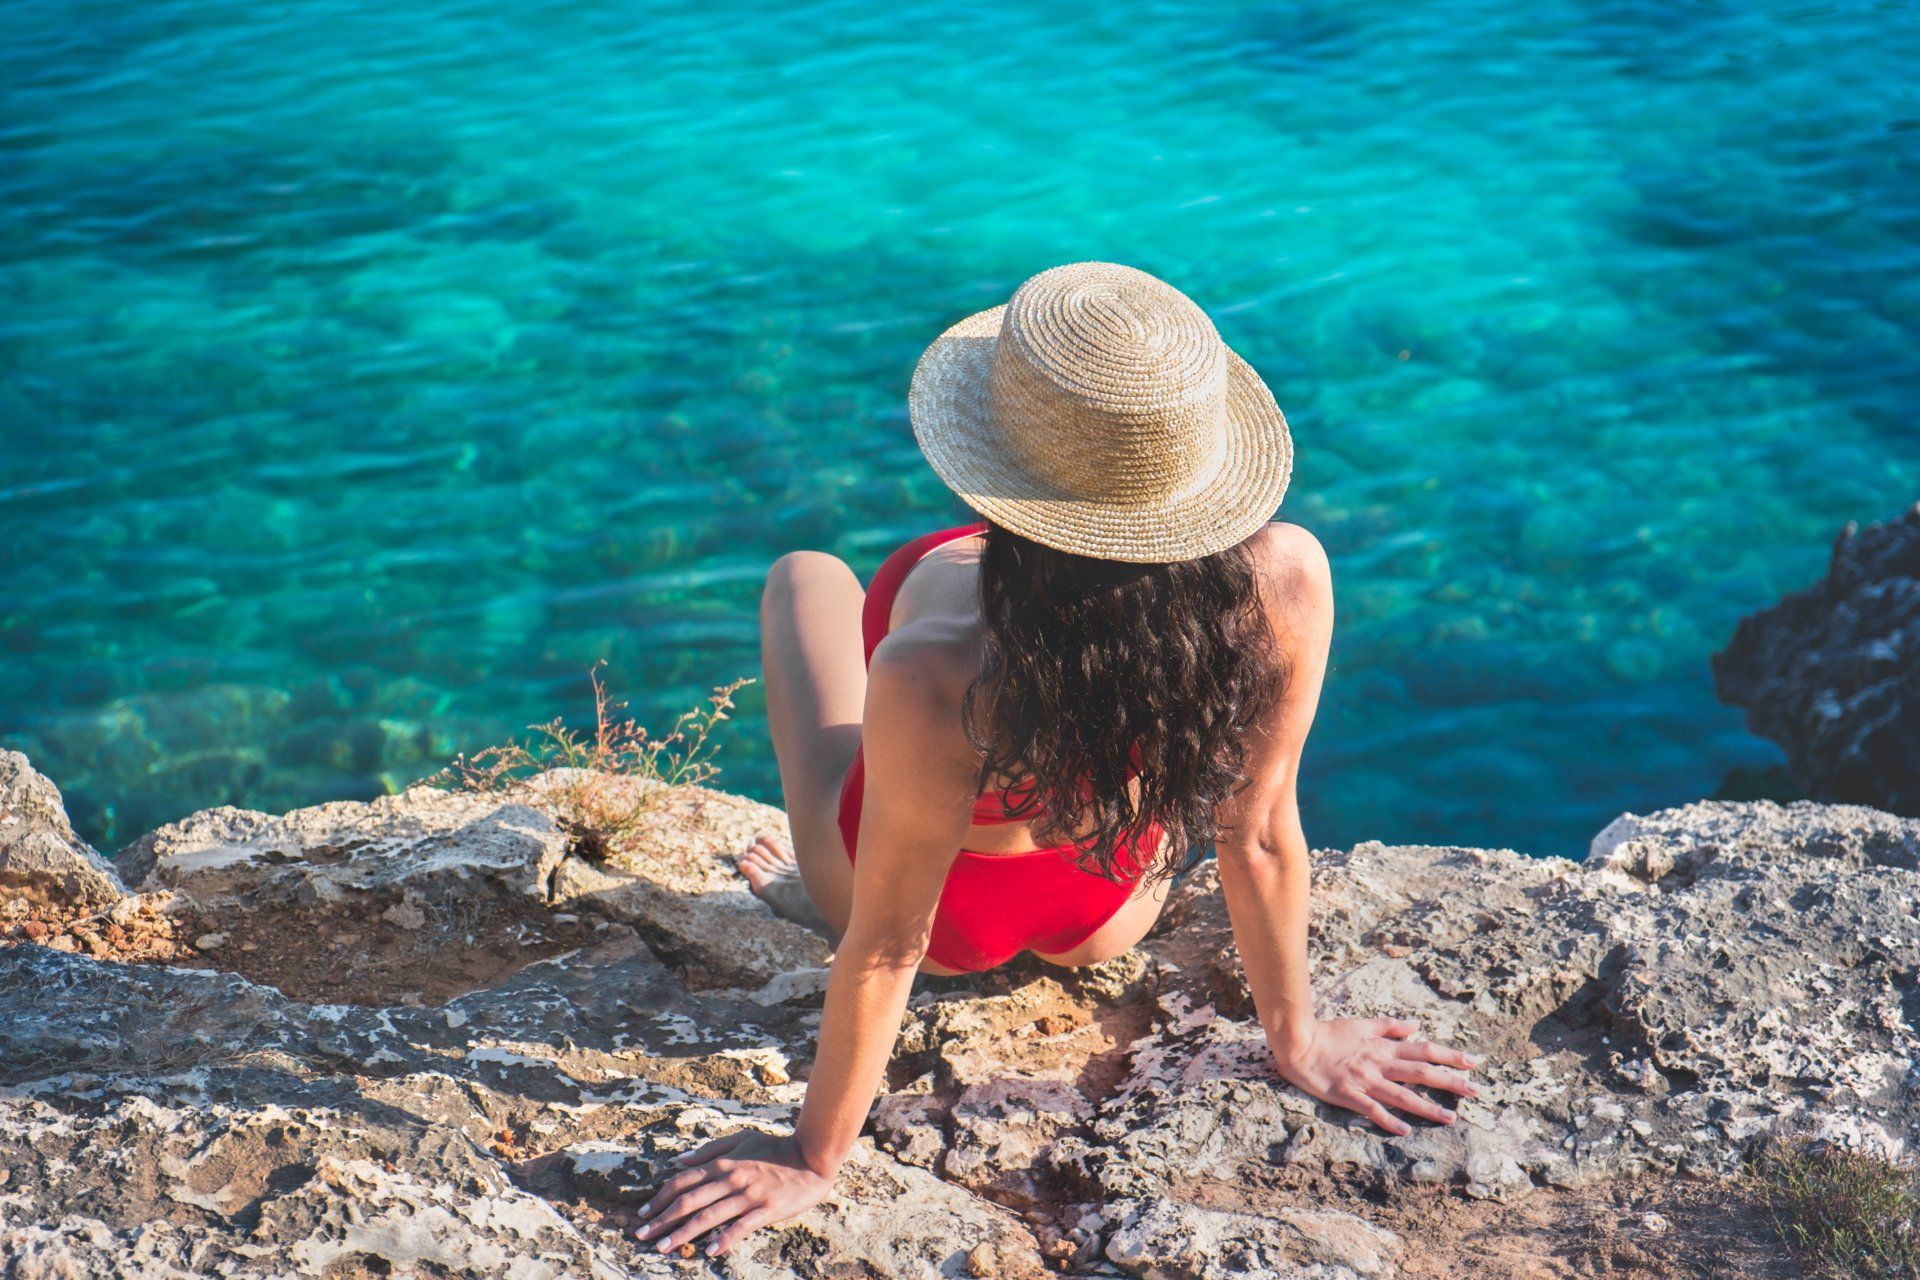 A woman in a red bikini and straw hat is sitting on a rock near the ocean.